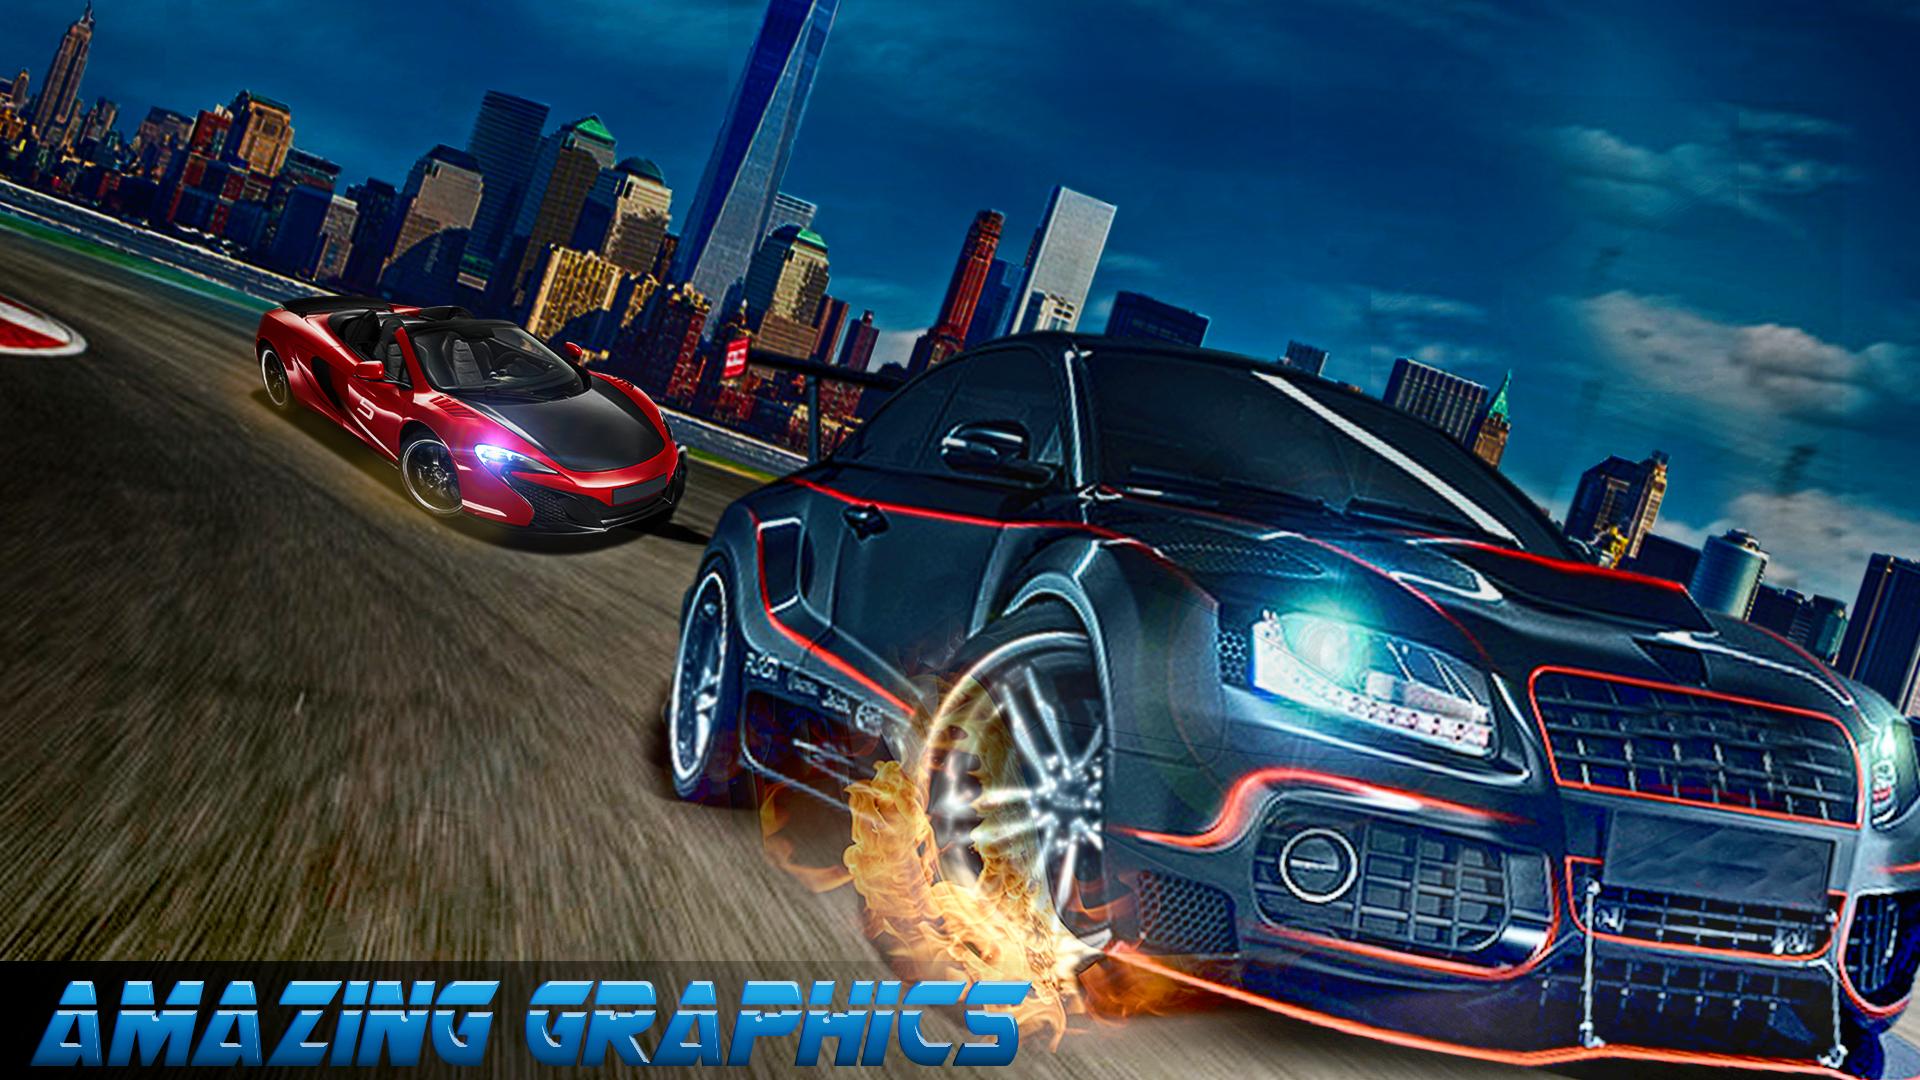 Car Speed игра. Real Turbo car Racing 3d. Super Speed Race. Speed Formula Rush Action Rider.